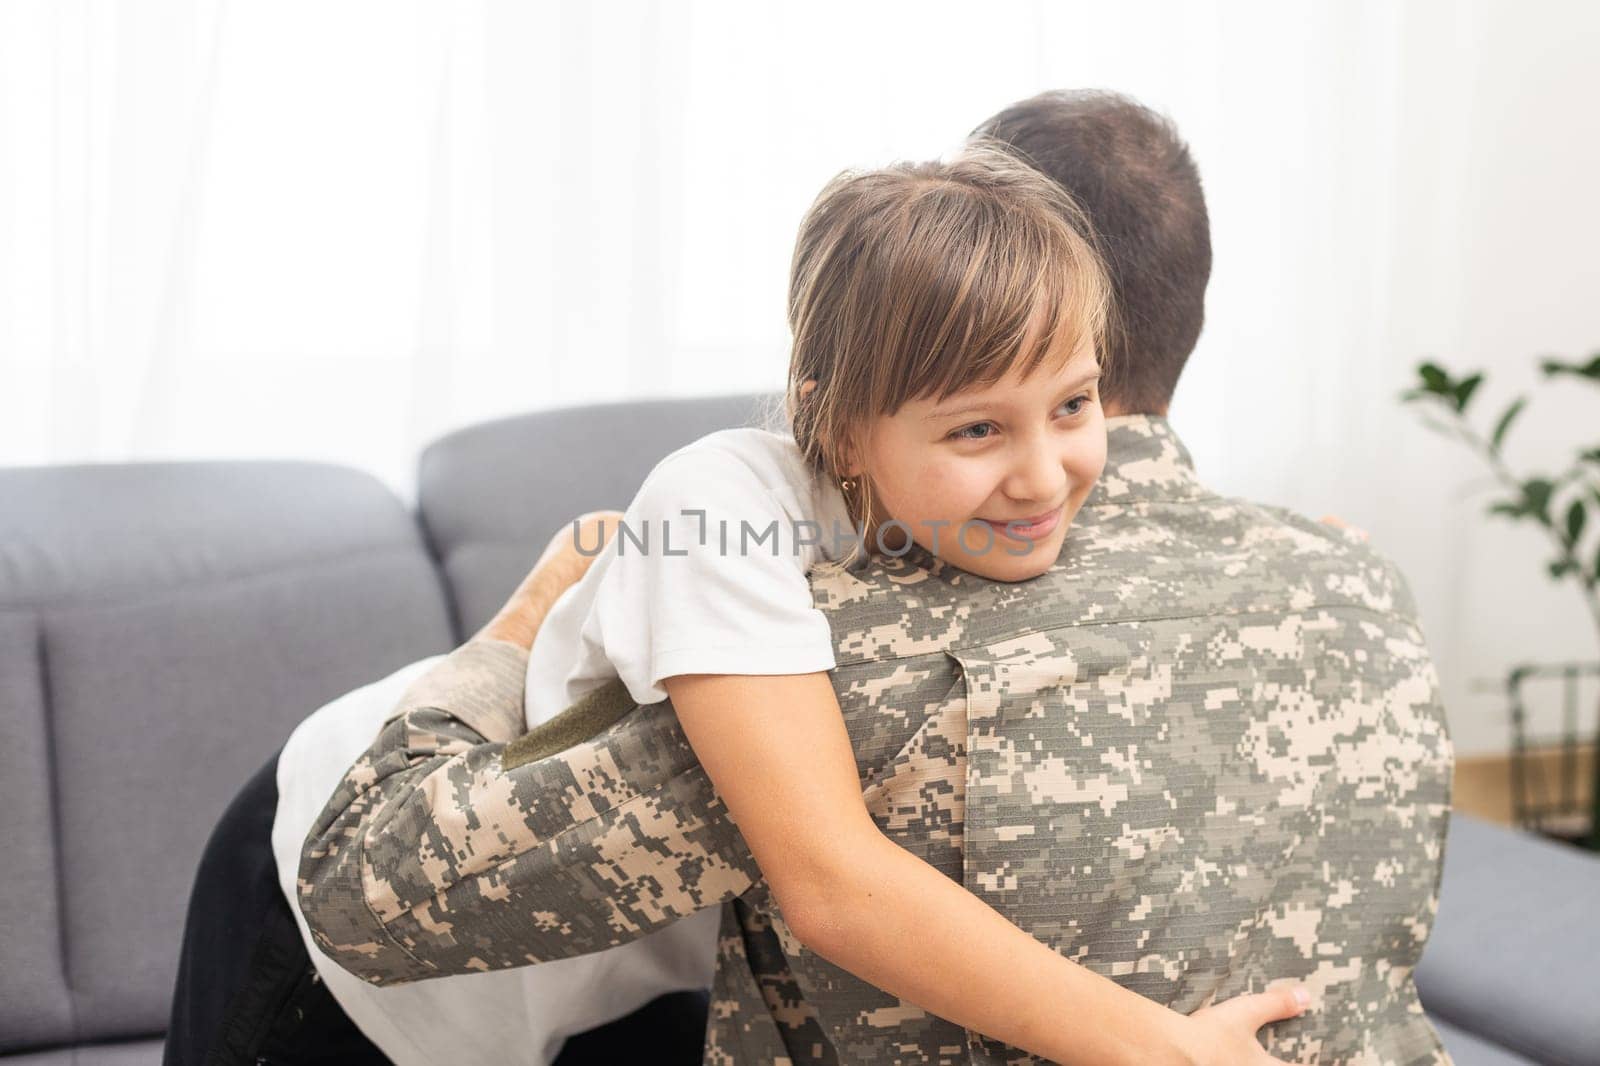 pretty little girl hugging her military father by Andelov13